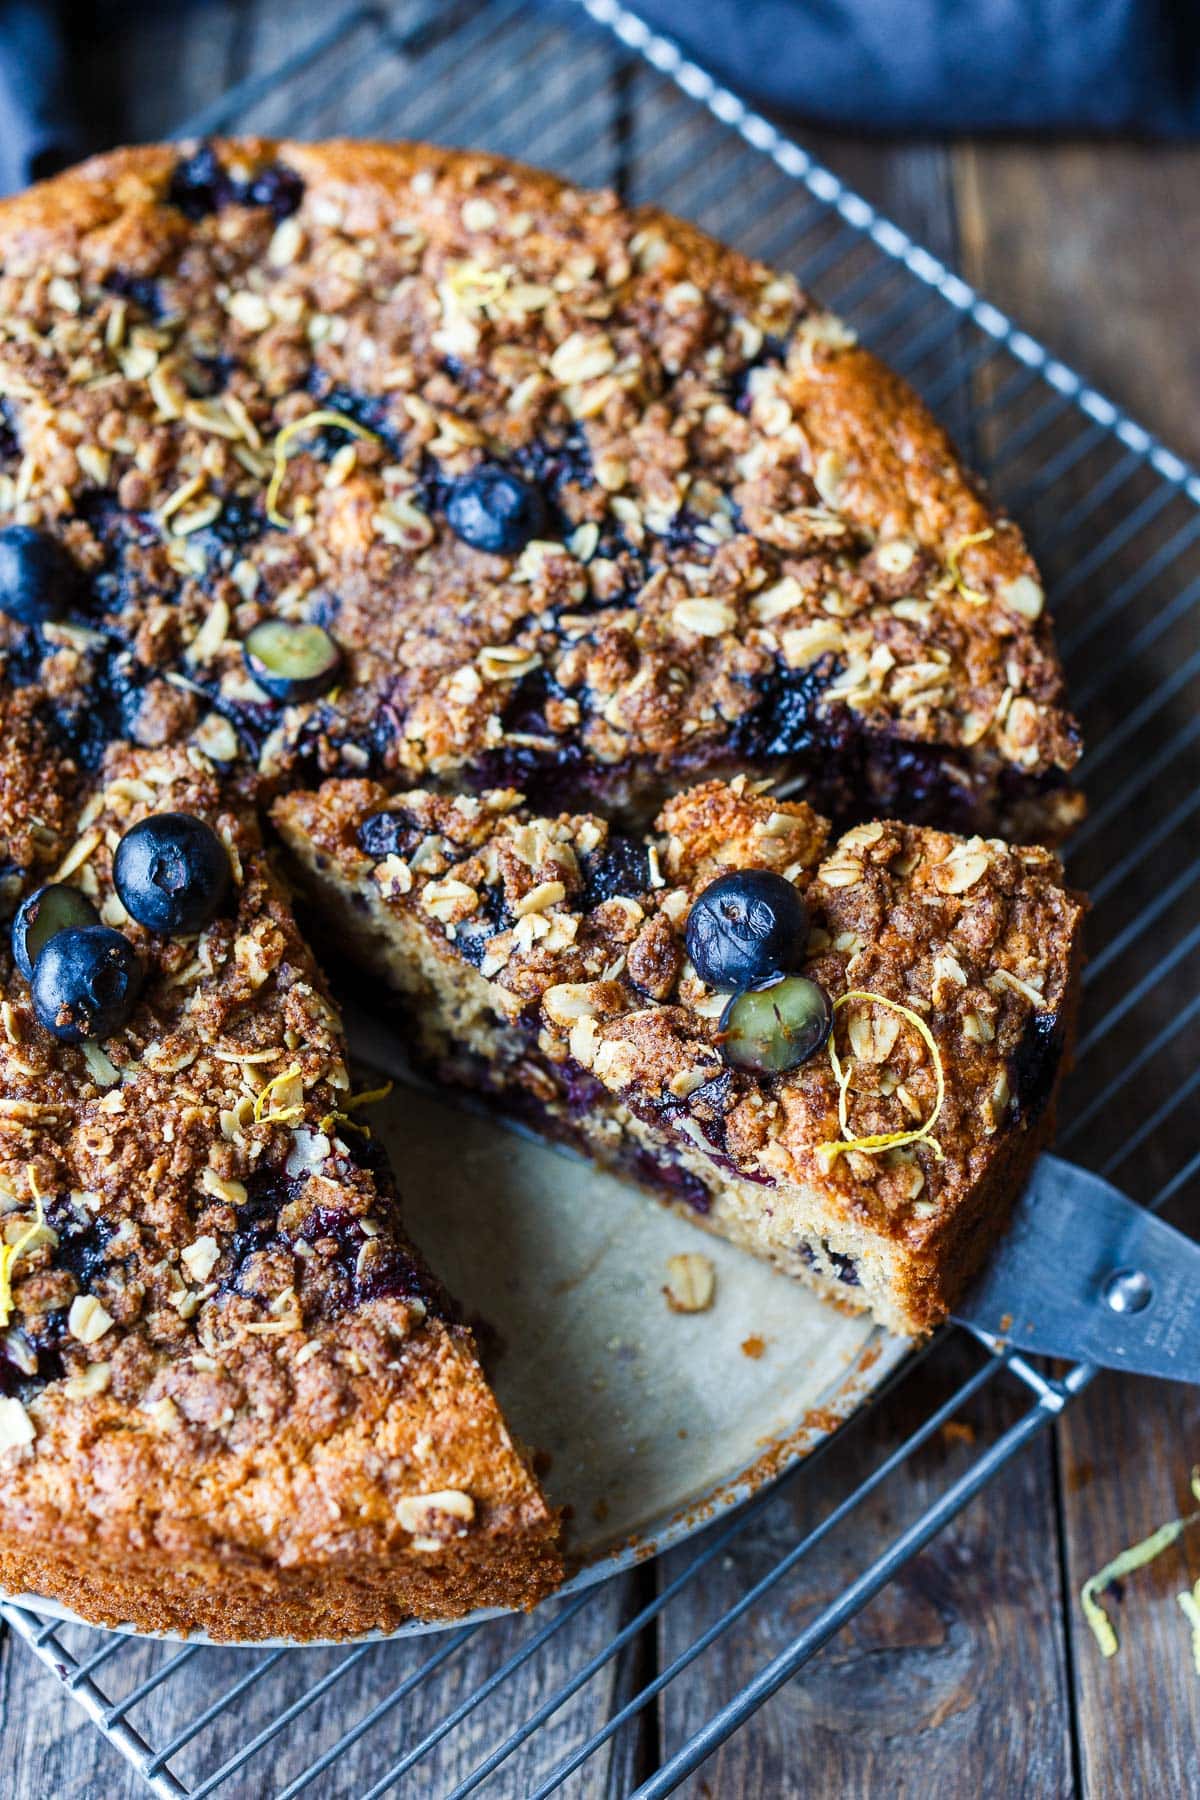 blueberry coffee cake with crumbly oat streusel topping, garnished with fresh blueberries and lemon zest.